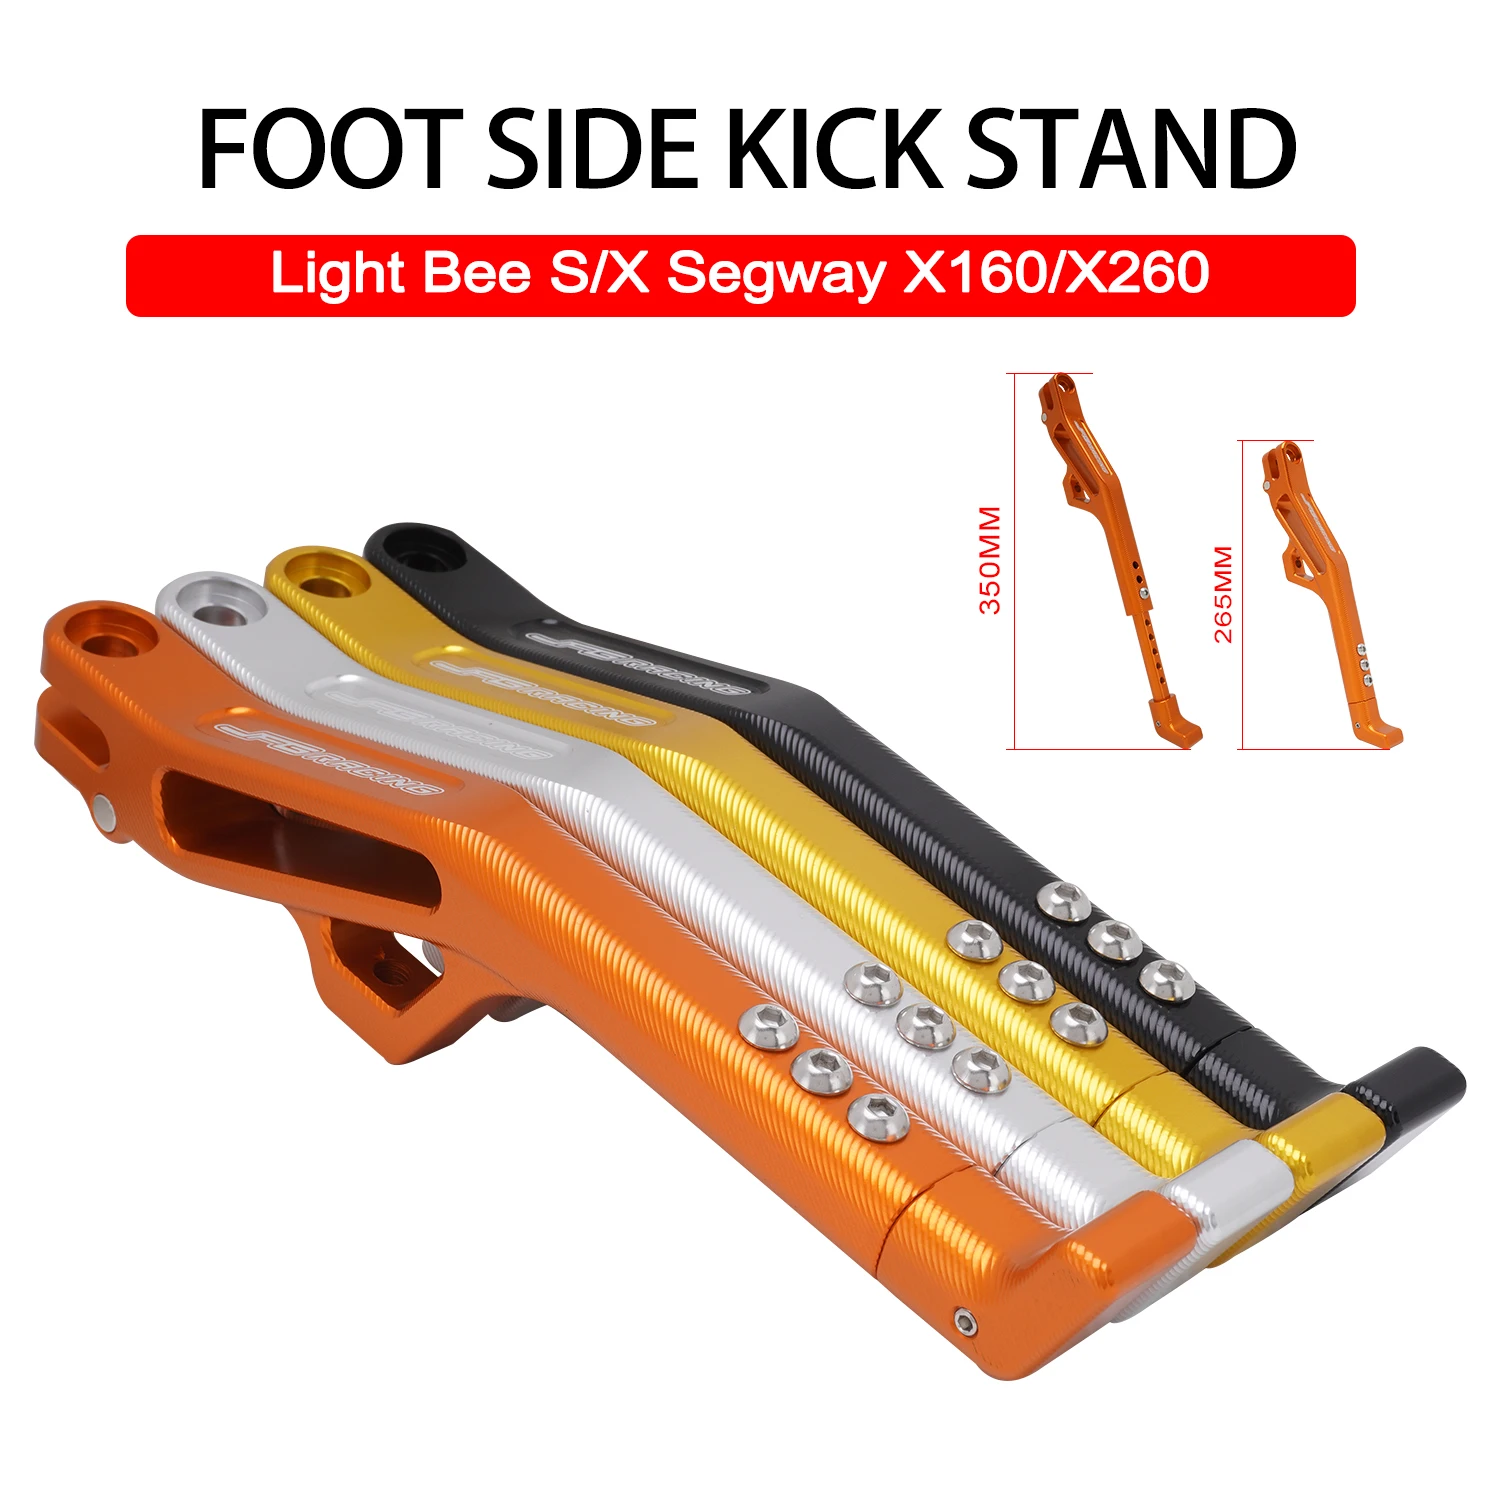 

Motorcycle Adjustable Electric Dirt Bike Foot Side Kick Stand Kickstand For Sur-Ron Light Bee S X For Segway X160 X260 160 260